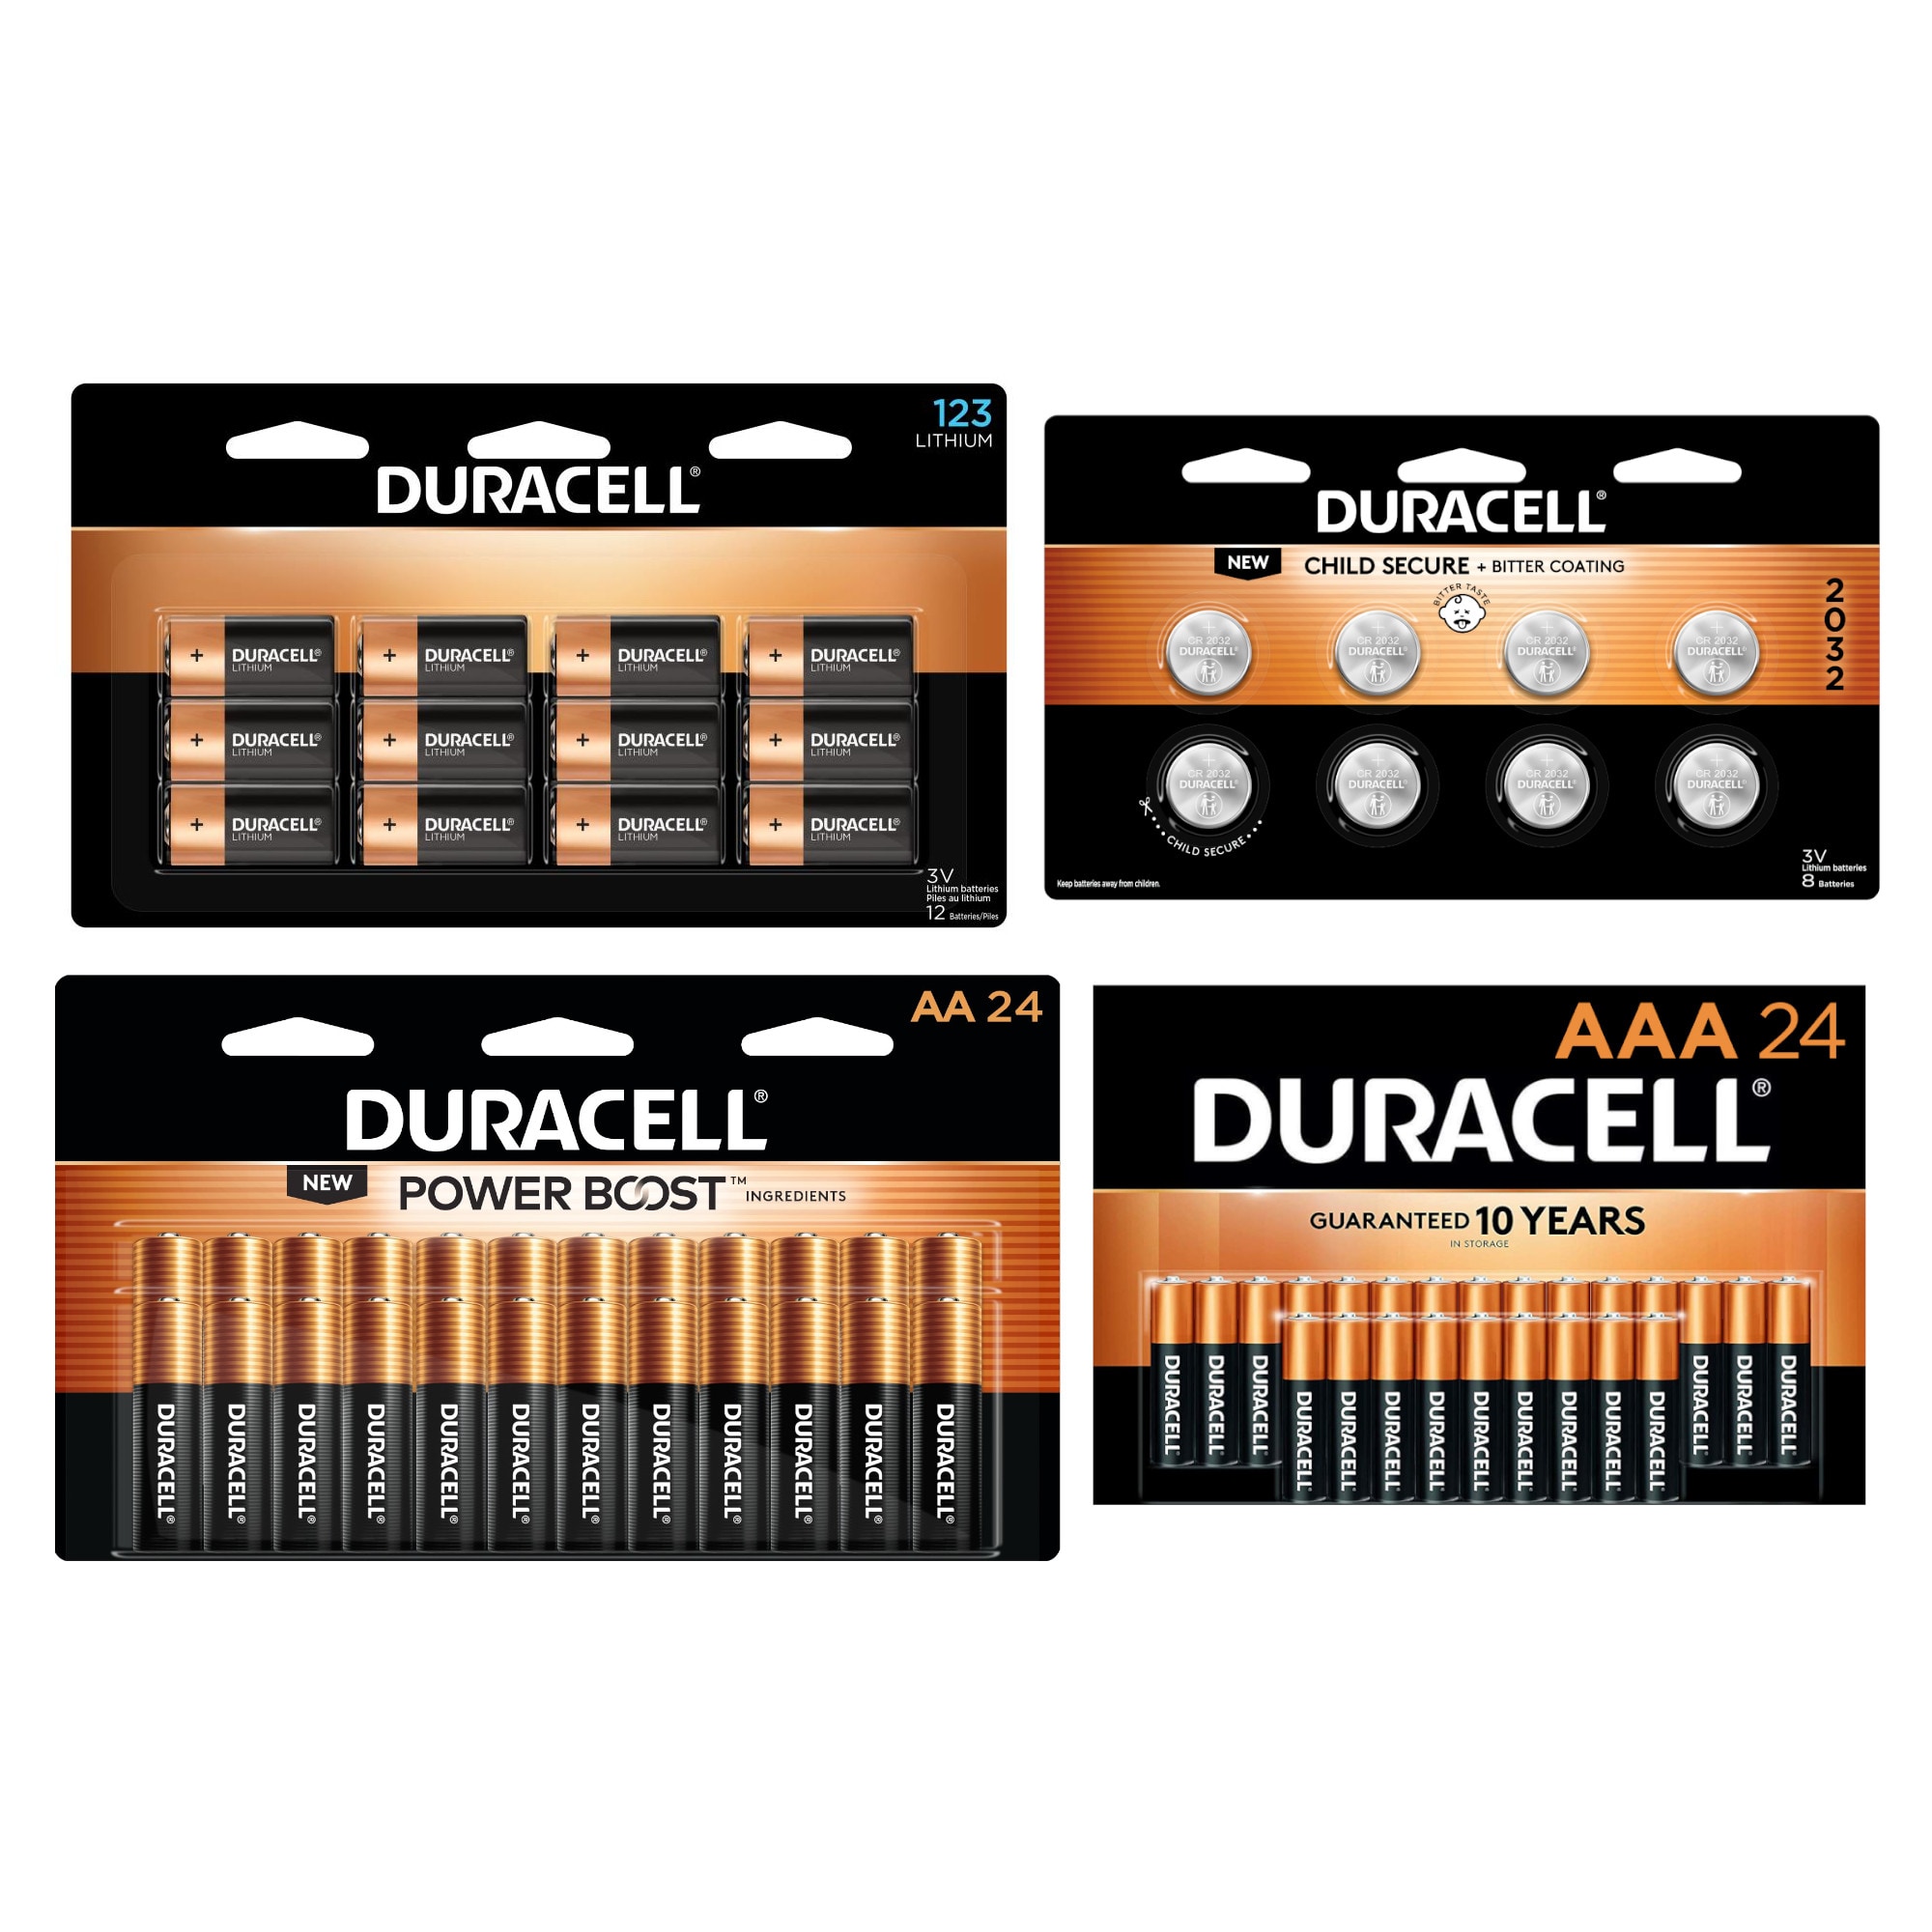 shop-duracell-pro-kit-at-lowes